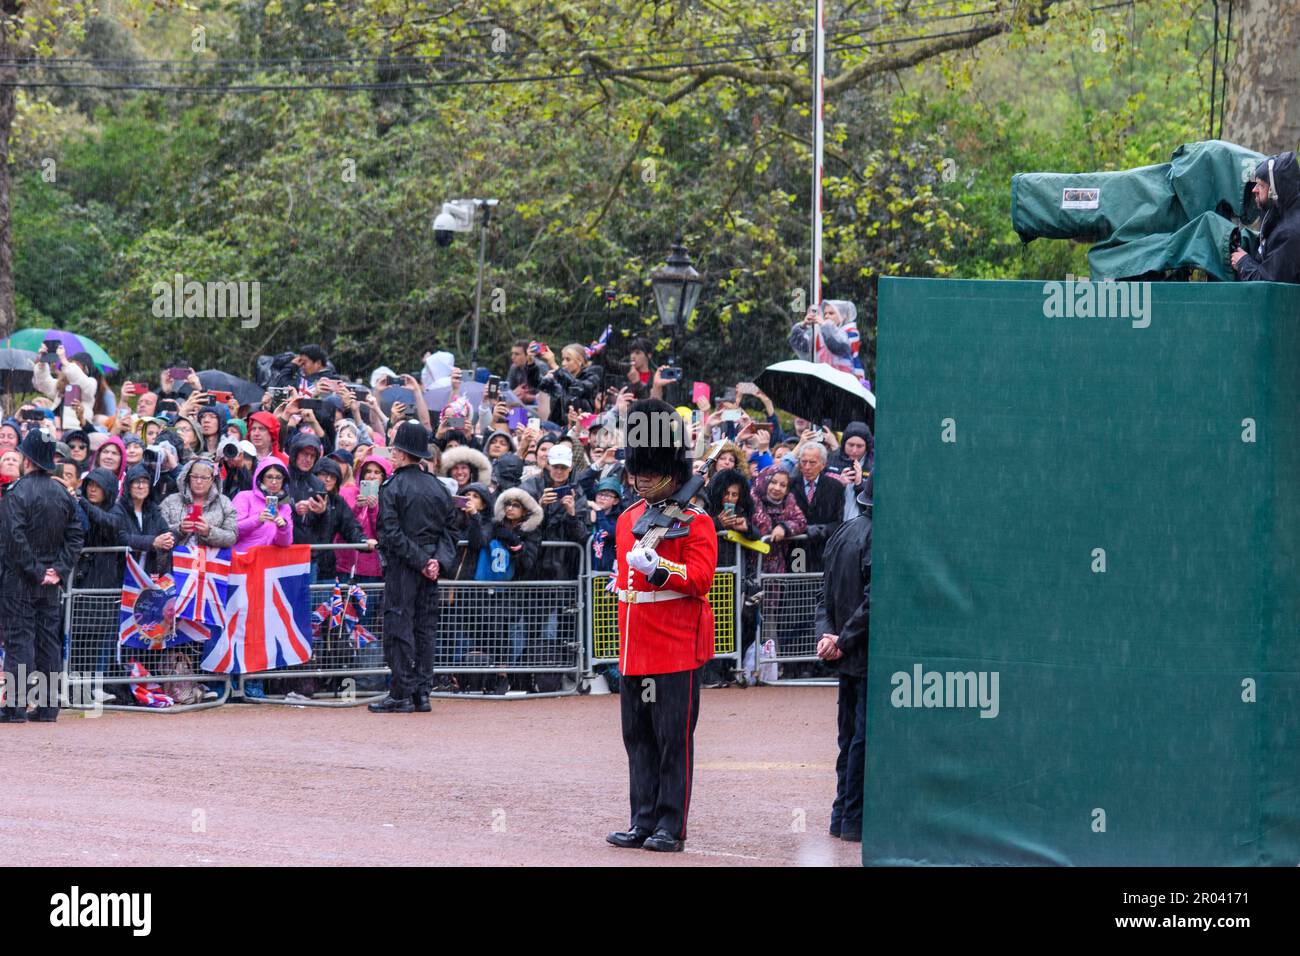 London, UK, 6. Mai 2023, The Coronation of King Charles III. Findet in Westminster Abbey statt, Andrew Lalchan Photography/Alamy Live News Stockfoto